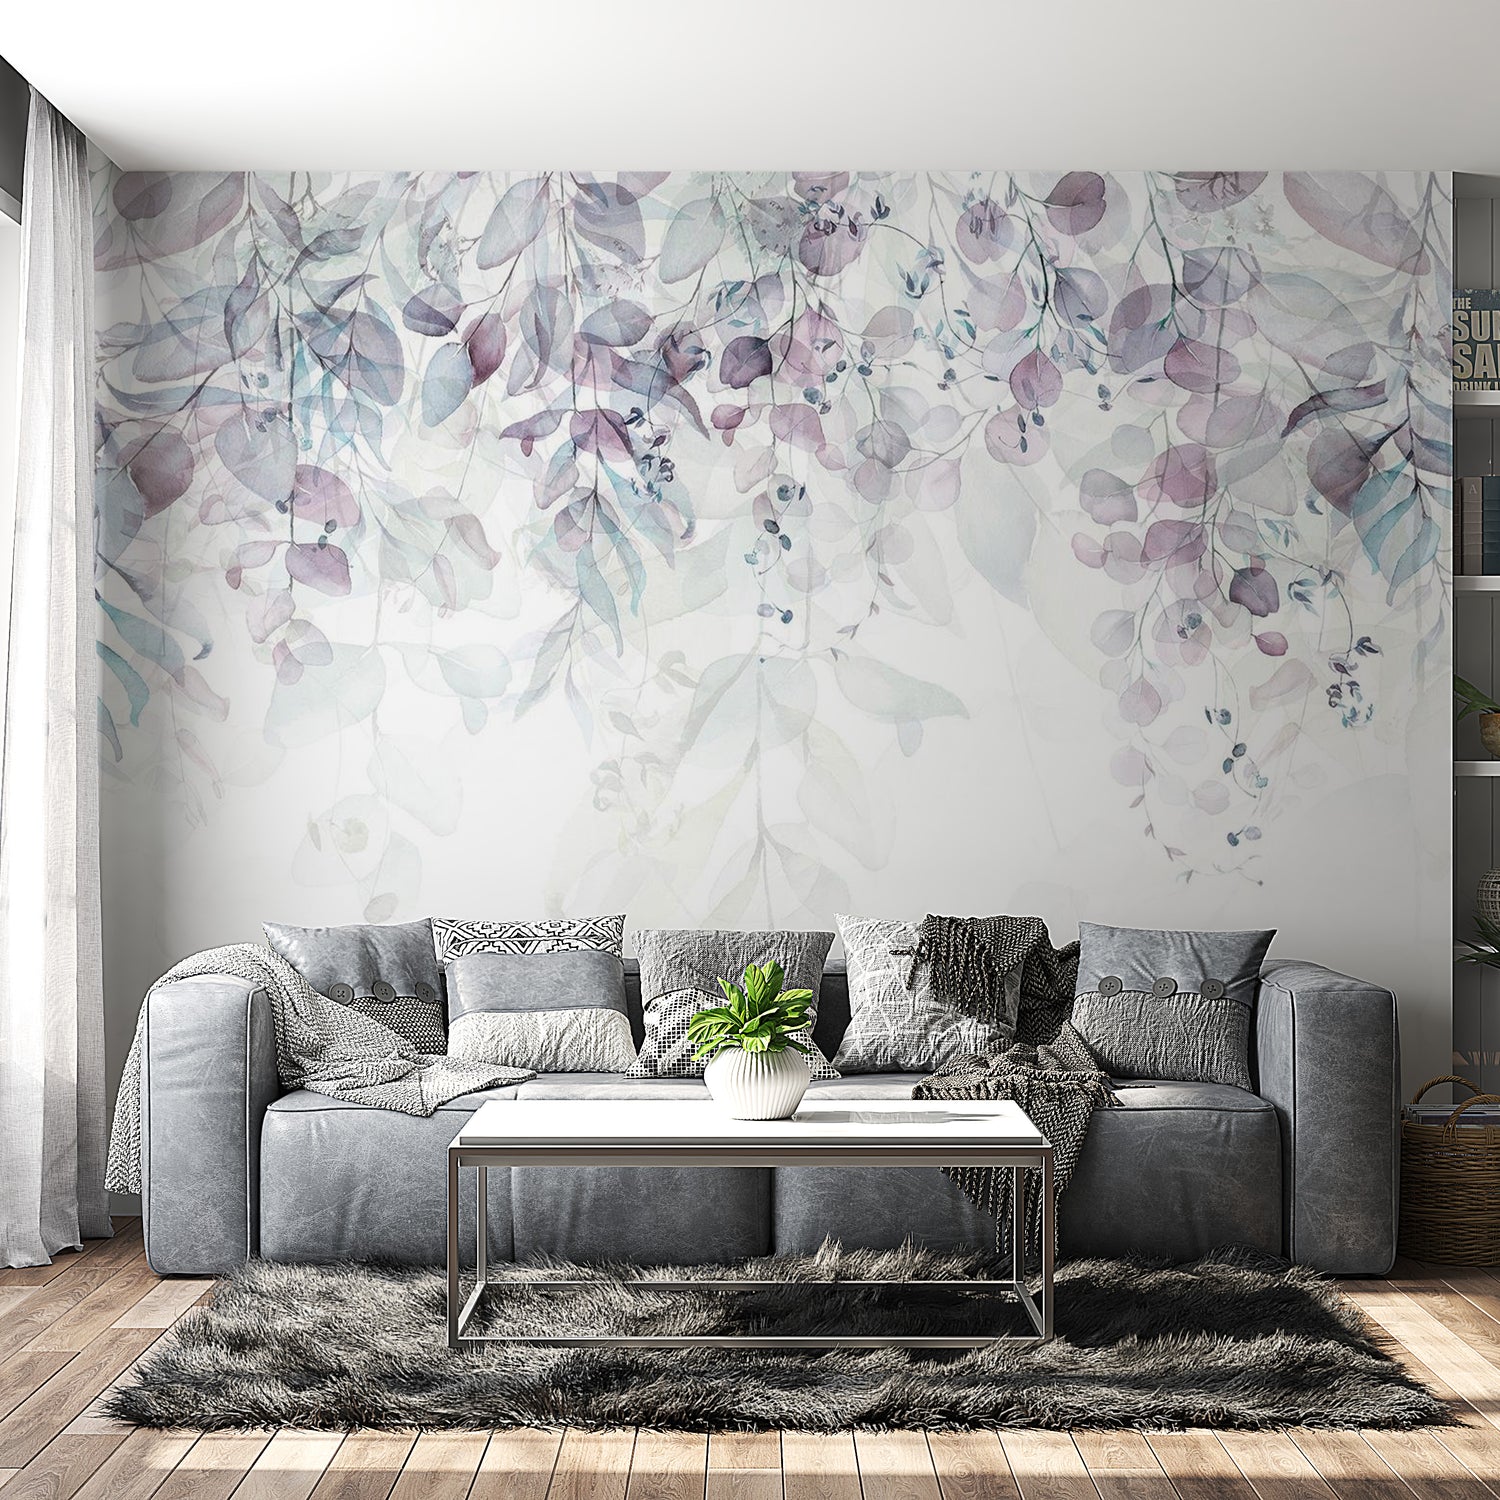 Peel & Stick Botanical Wall Mural - Pastel Gentle Touch Of Nature - Removable Wall Decals